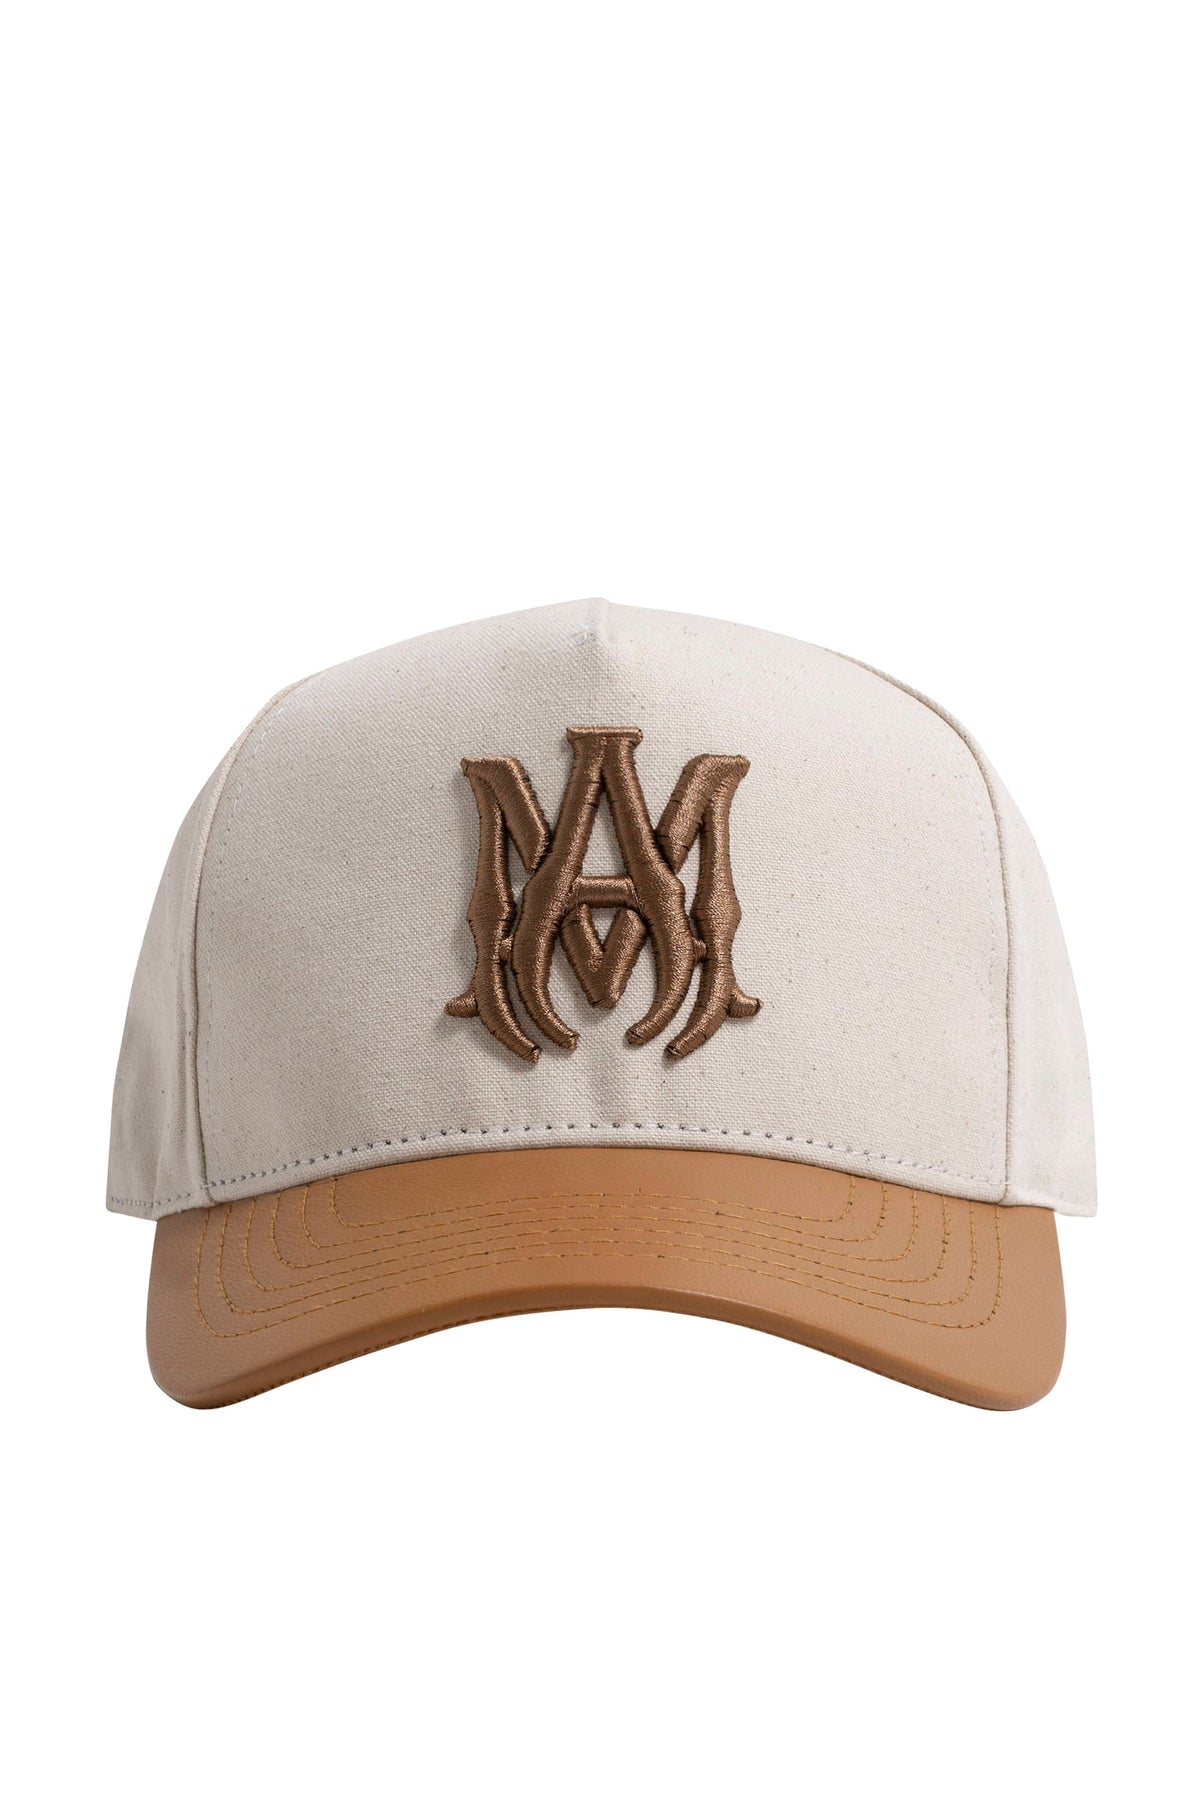 TWO TONE CANVAS SUEDE MA HAT / NATURAL